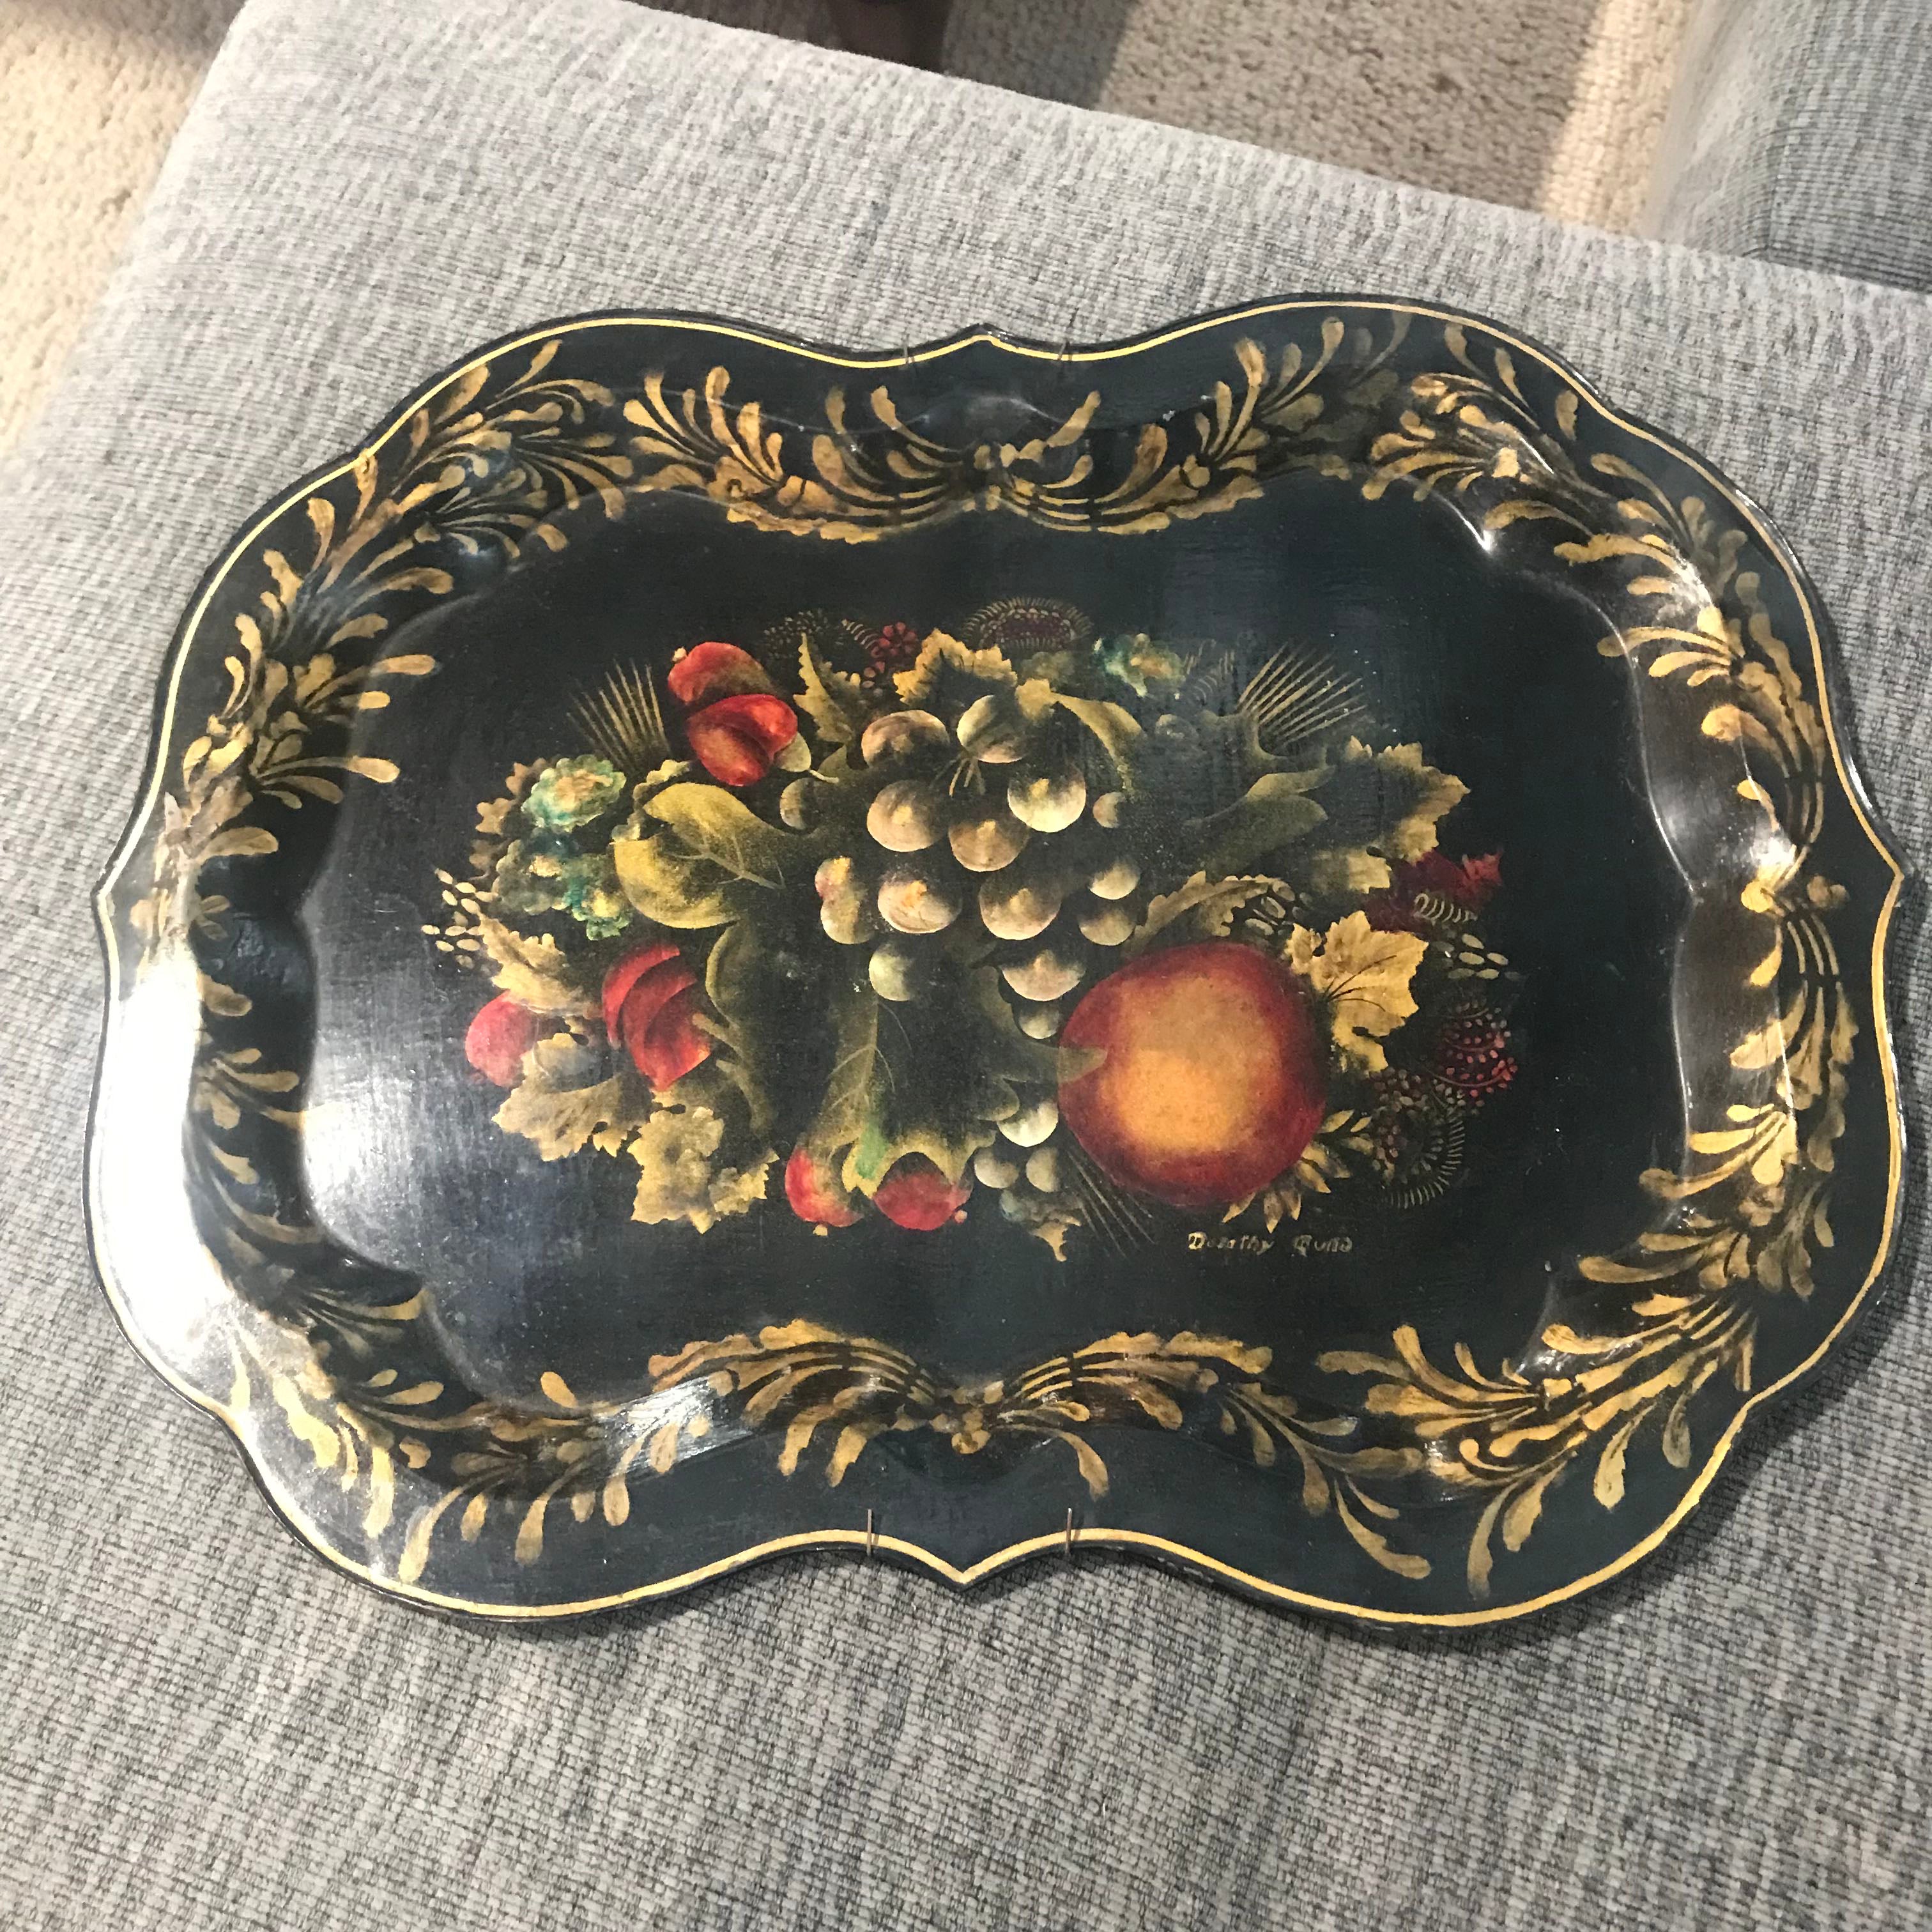 24"x 18.5" 1930's Handpainted with Chippendale Shape Signed Tole Painted Tray